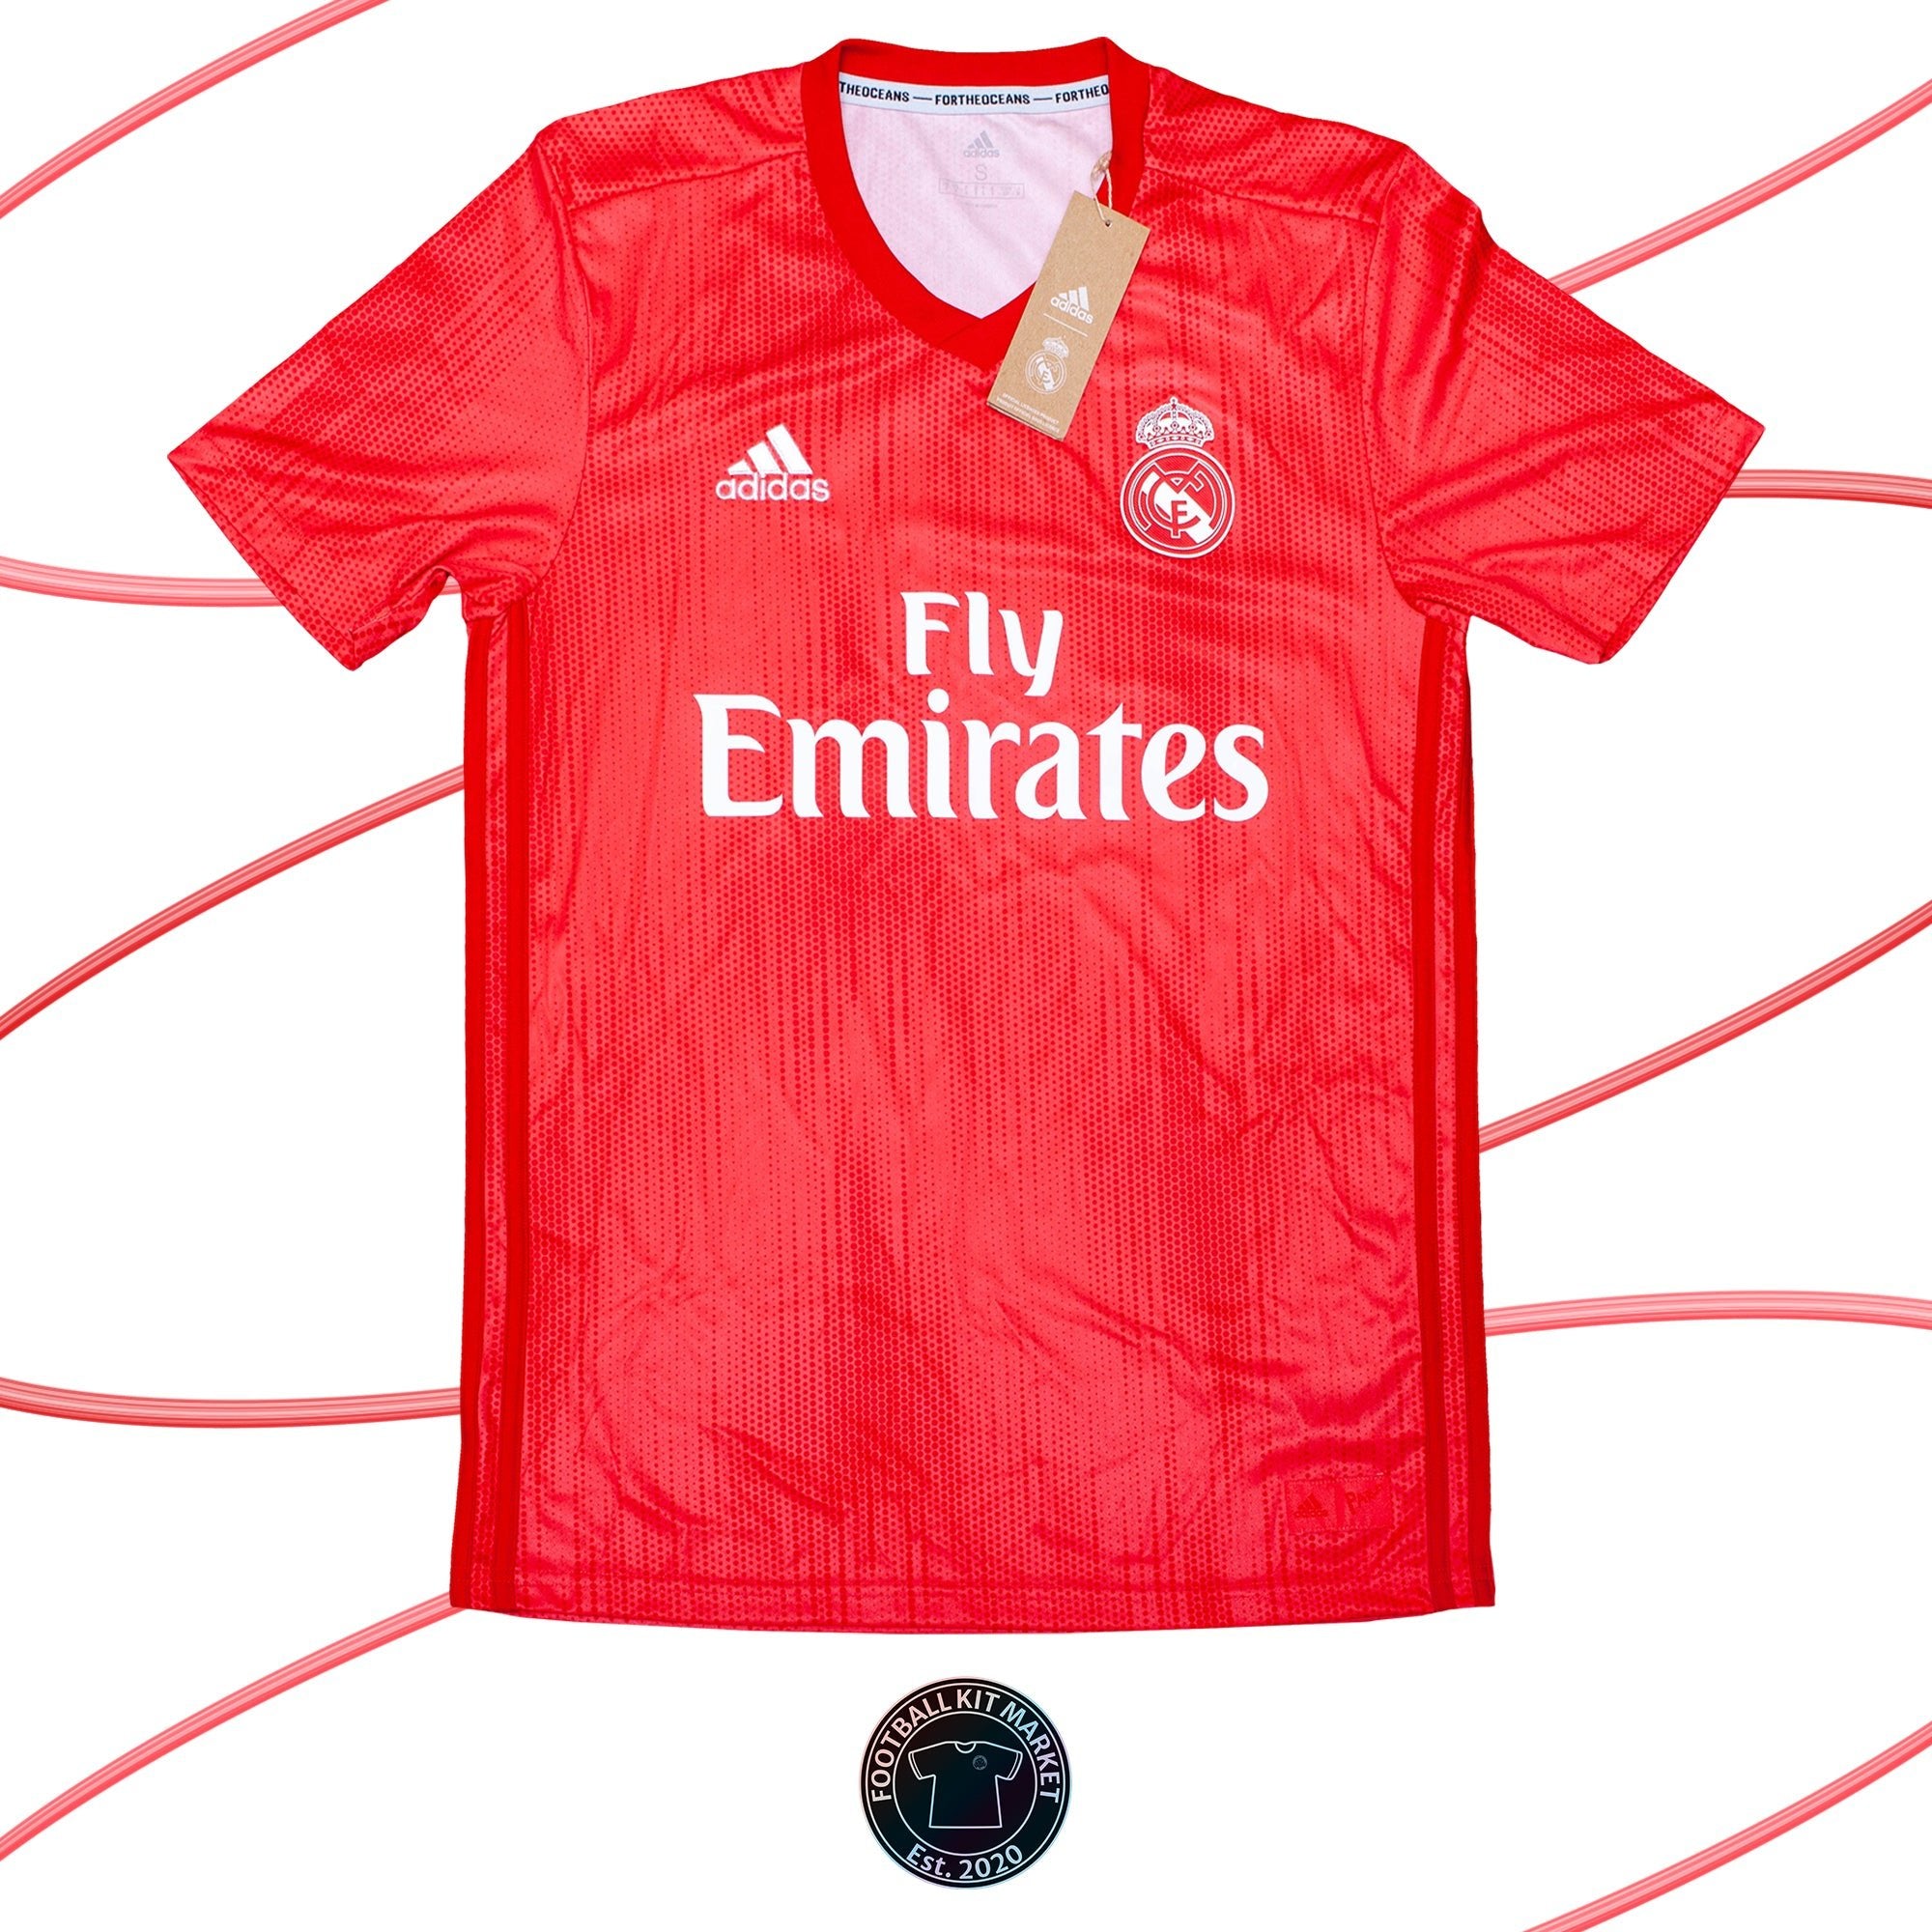 Genuine REAL MADRID 3rd Shirt (2018-2019) - ADIDAS (S) - Product Image from Football Kit Market